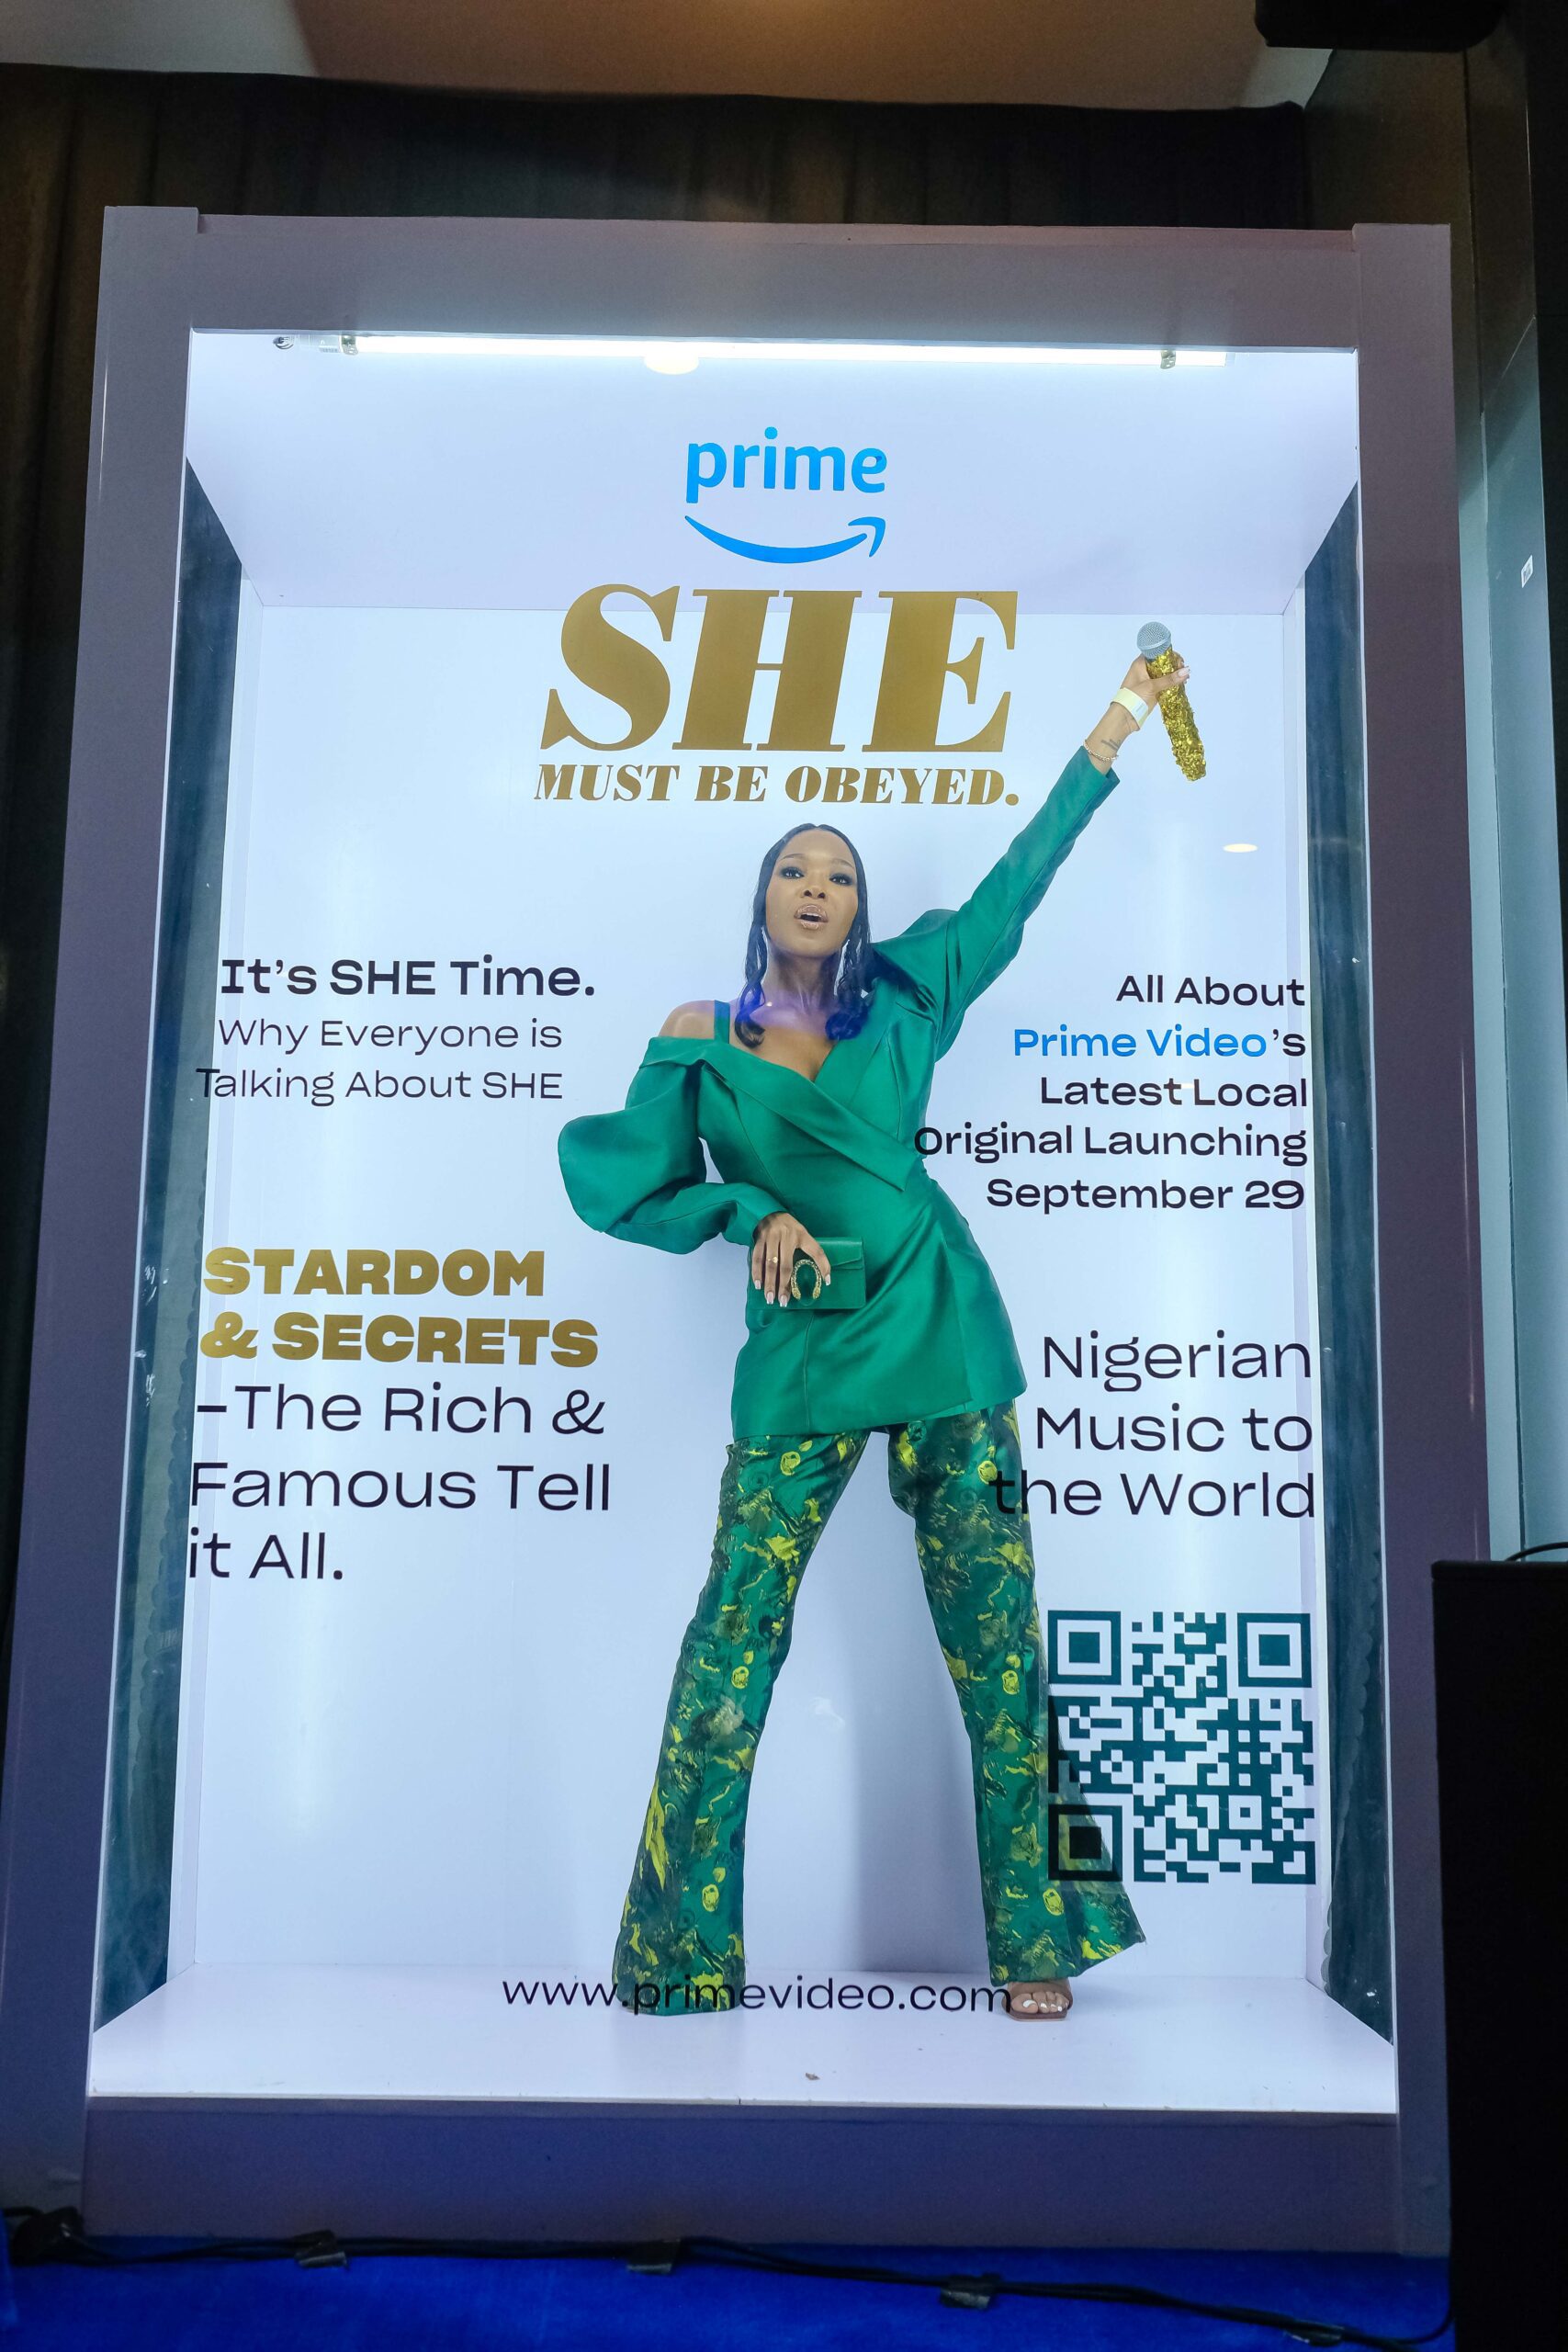 DSCF0736 scaled - Prime Video Launches “She Must Be Obeyed” Series, Its 3rd Nigerian Original Title With Grandeur and Style!